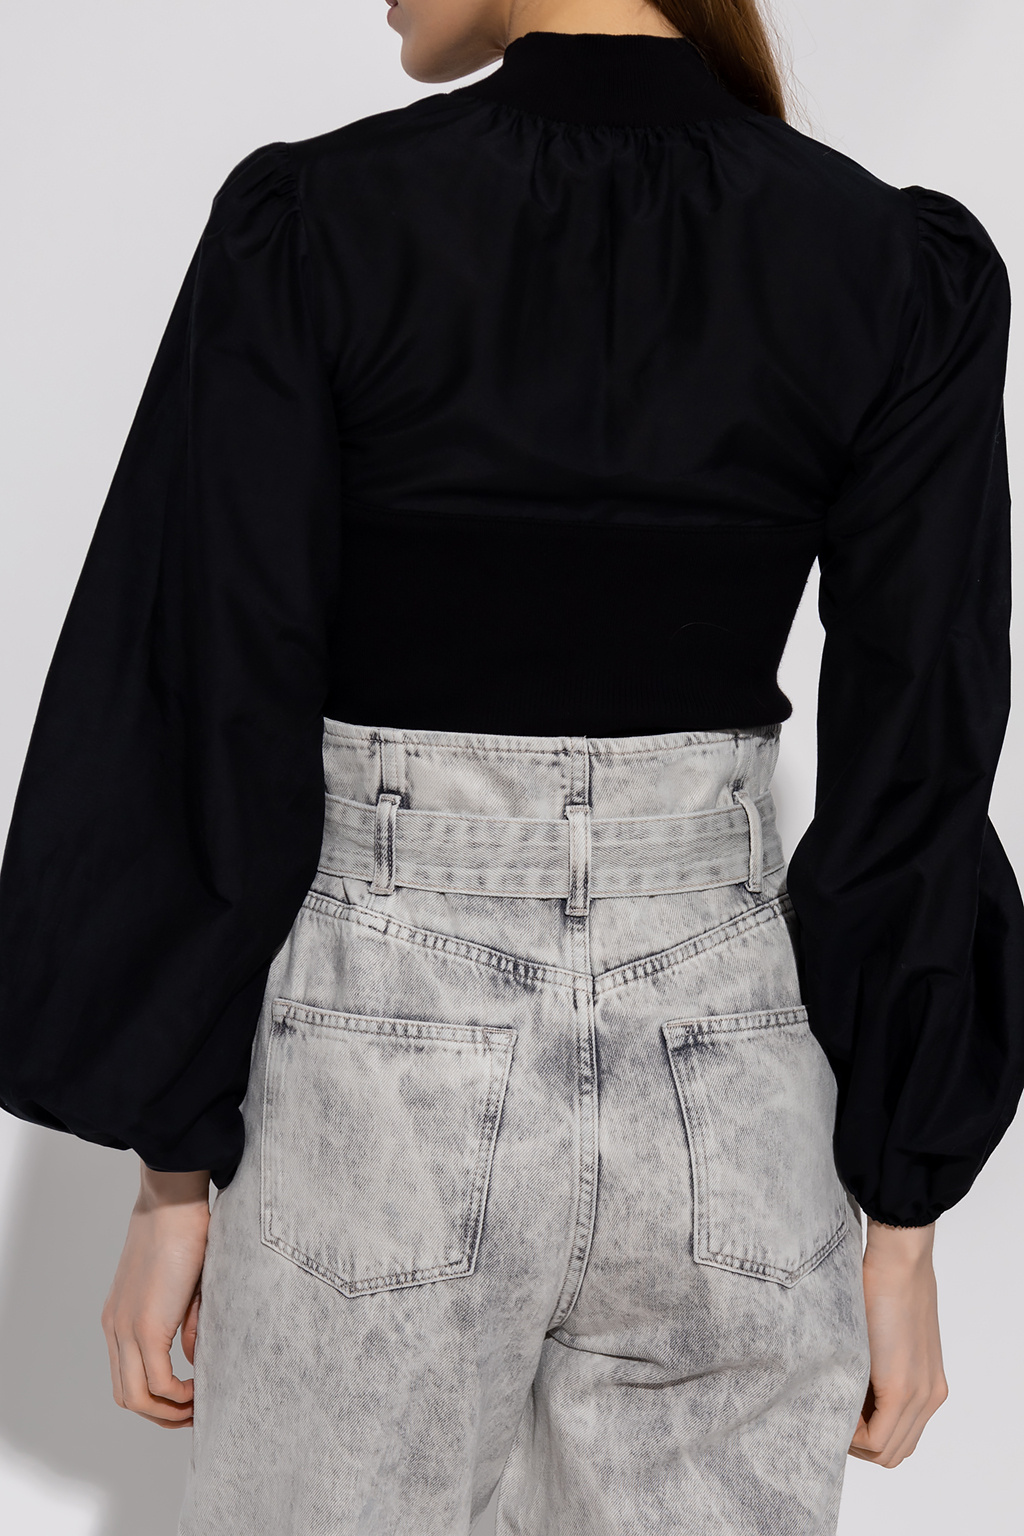 AllSaints ‘Cleo’ top with puff sleeves